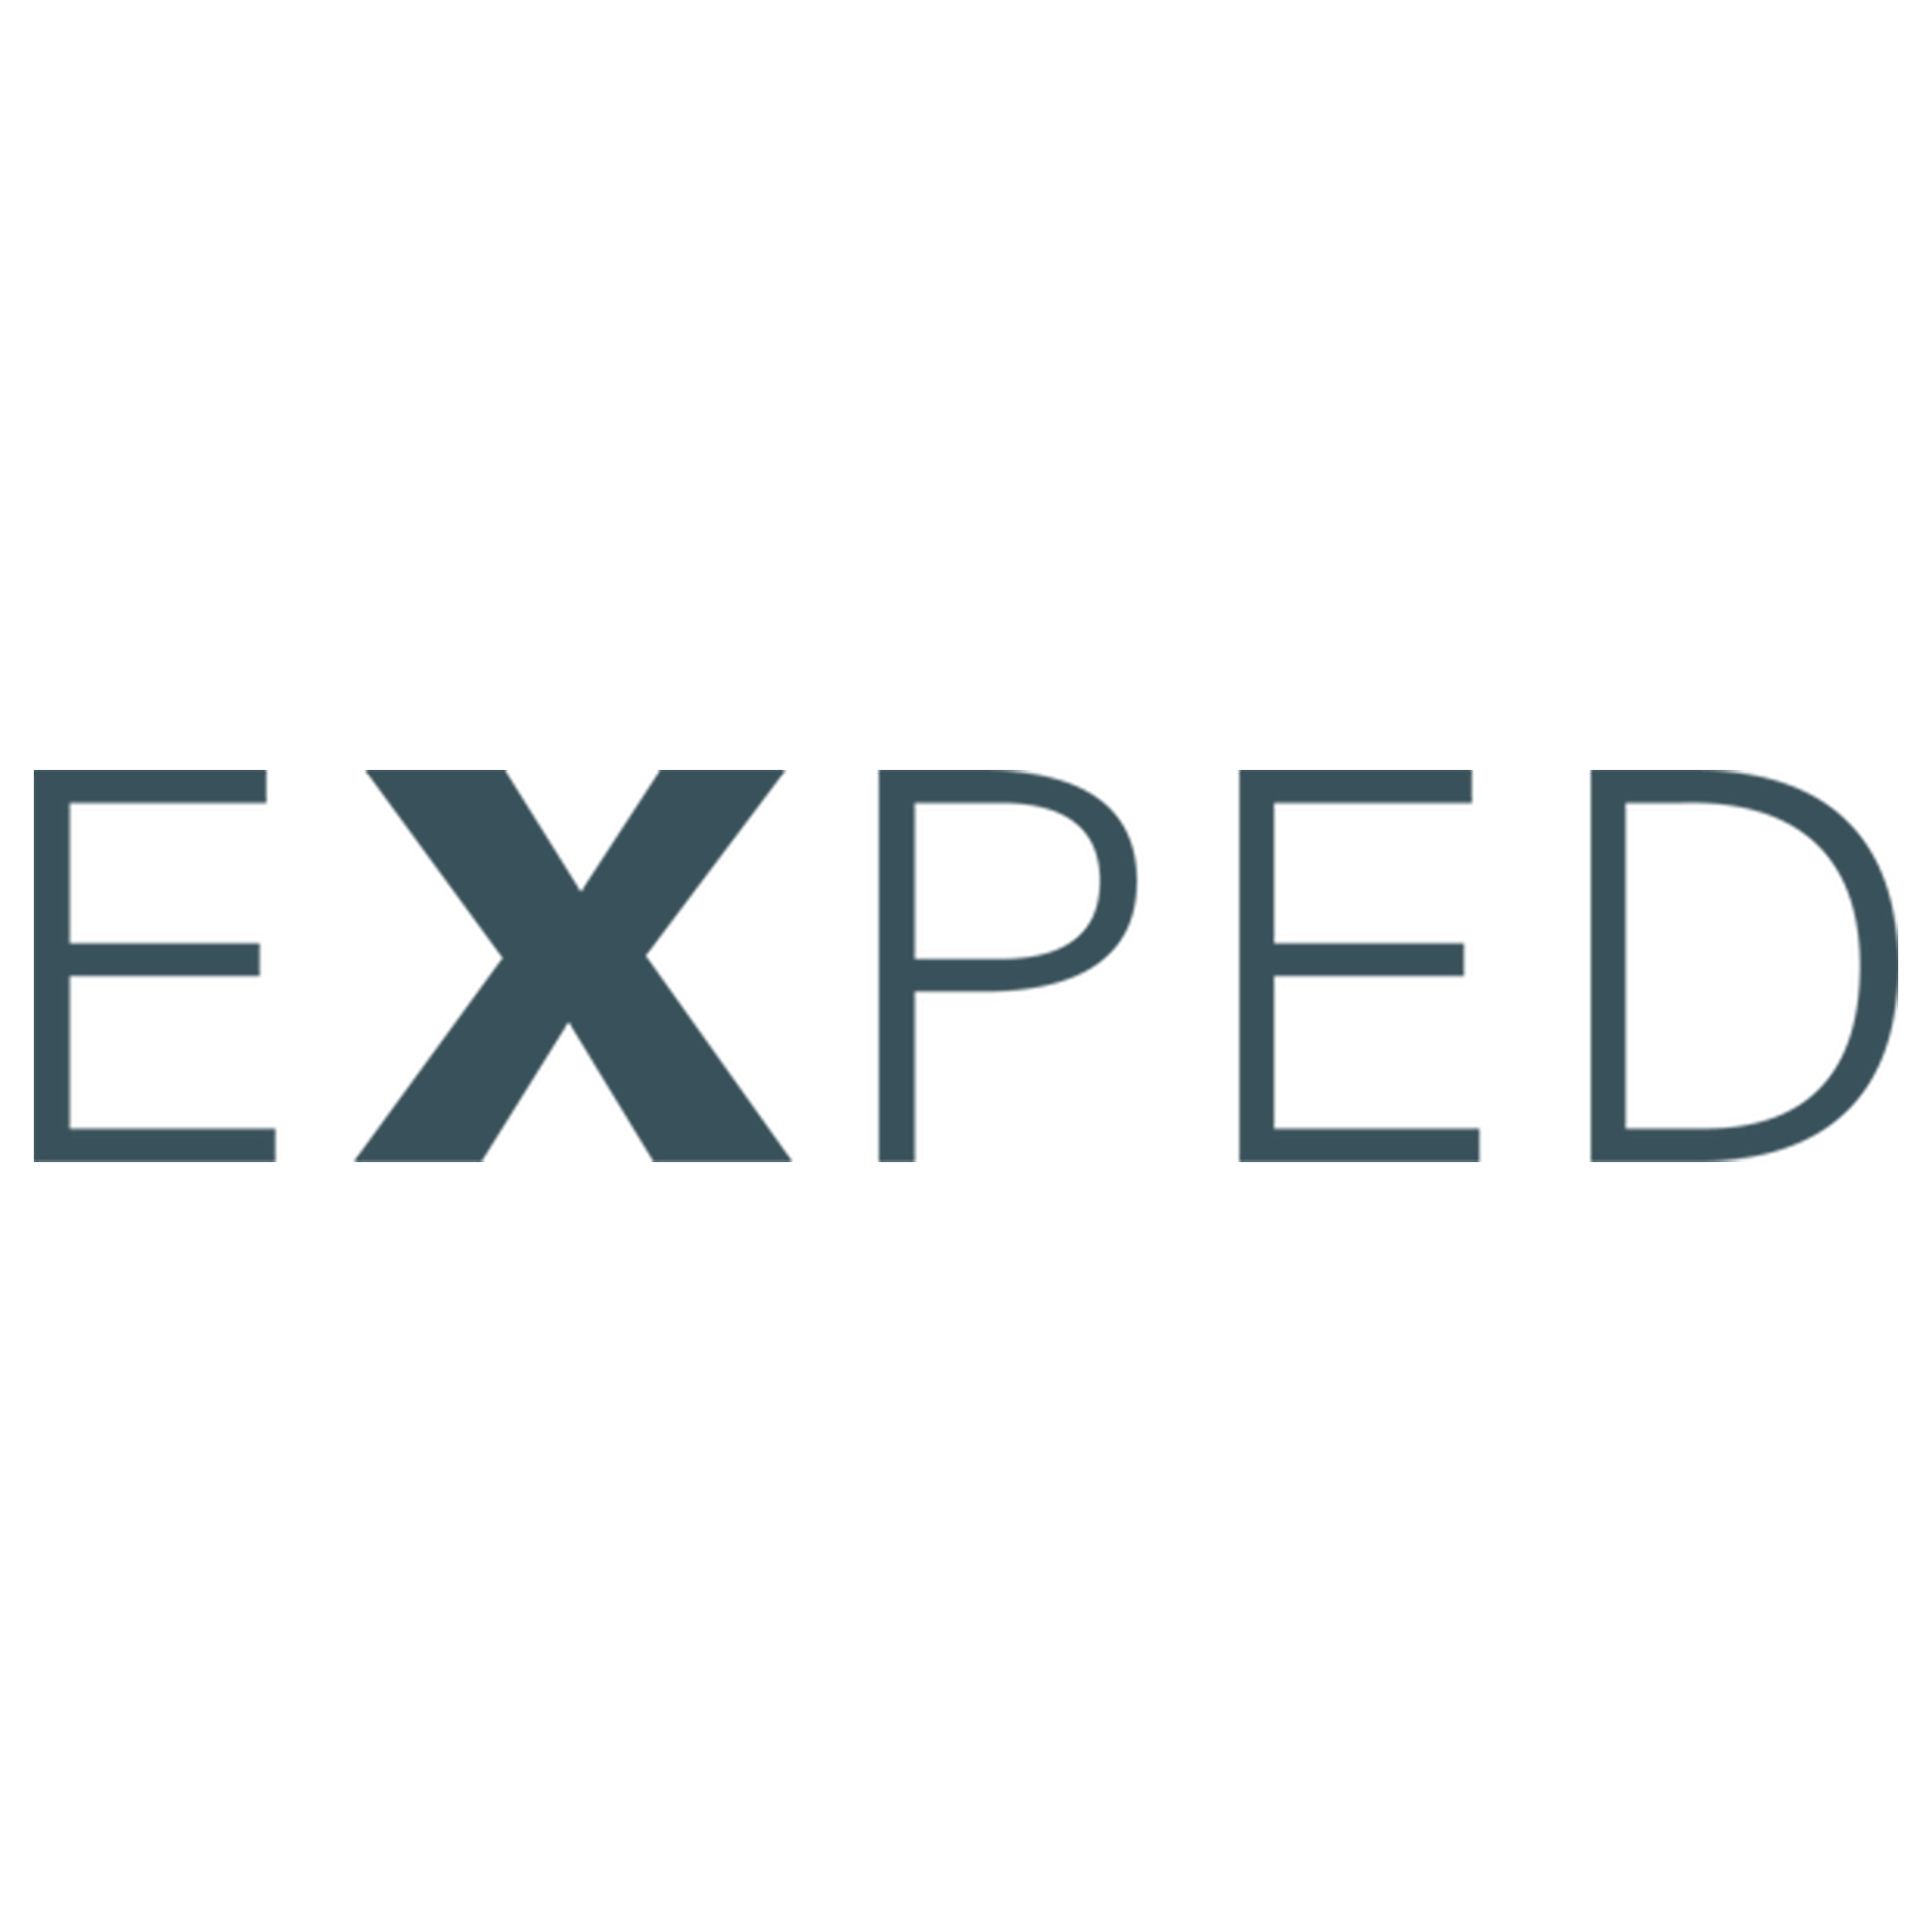 EXPED